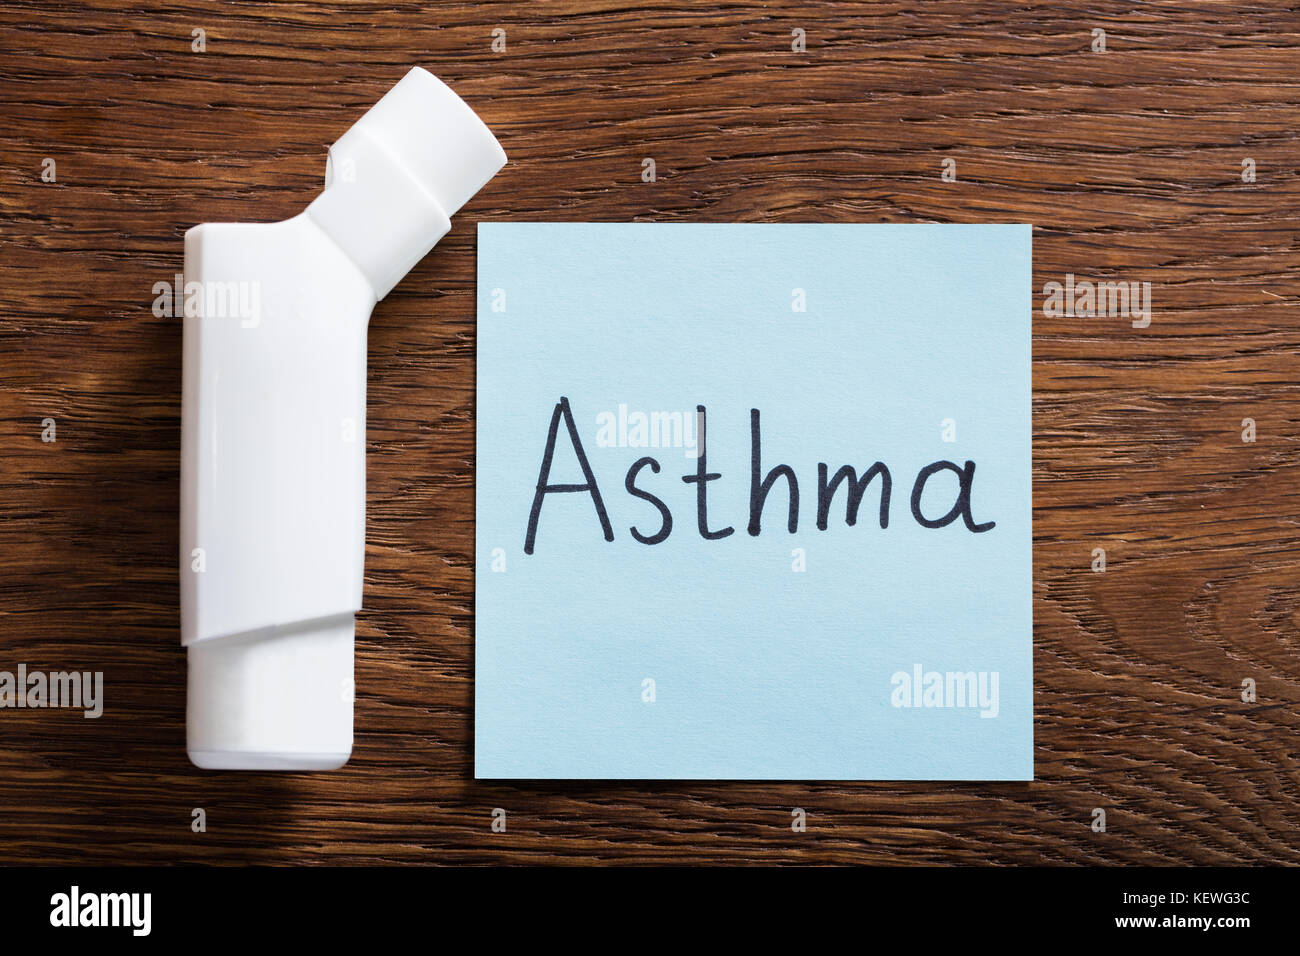 Medical Concept Of Asthma With An Inhaler On Wooden Desk Stock Photo